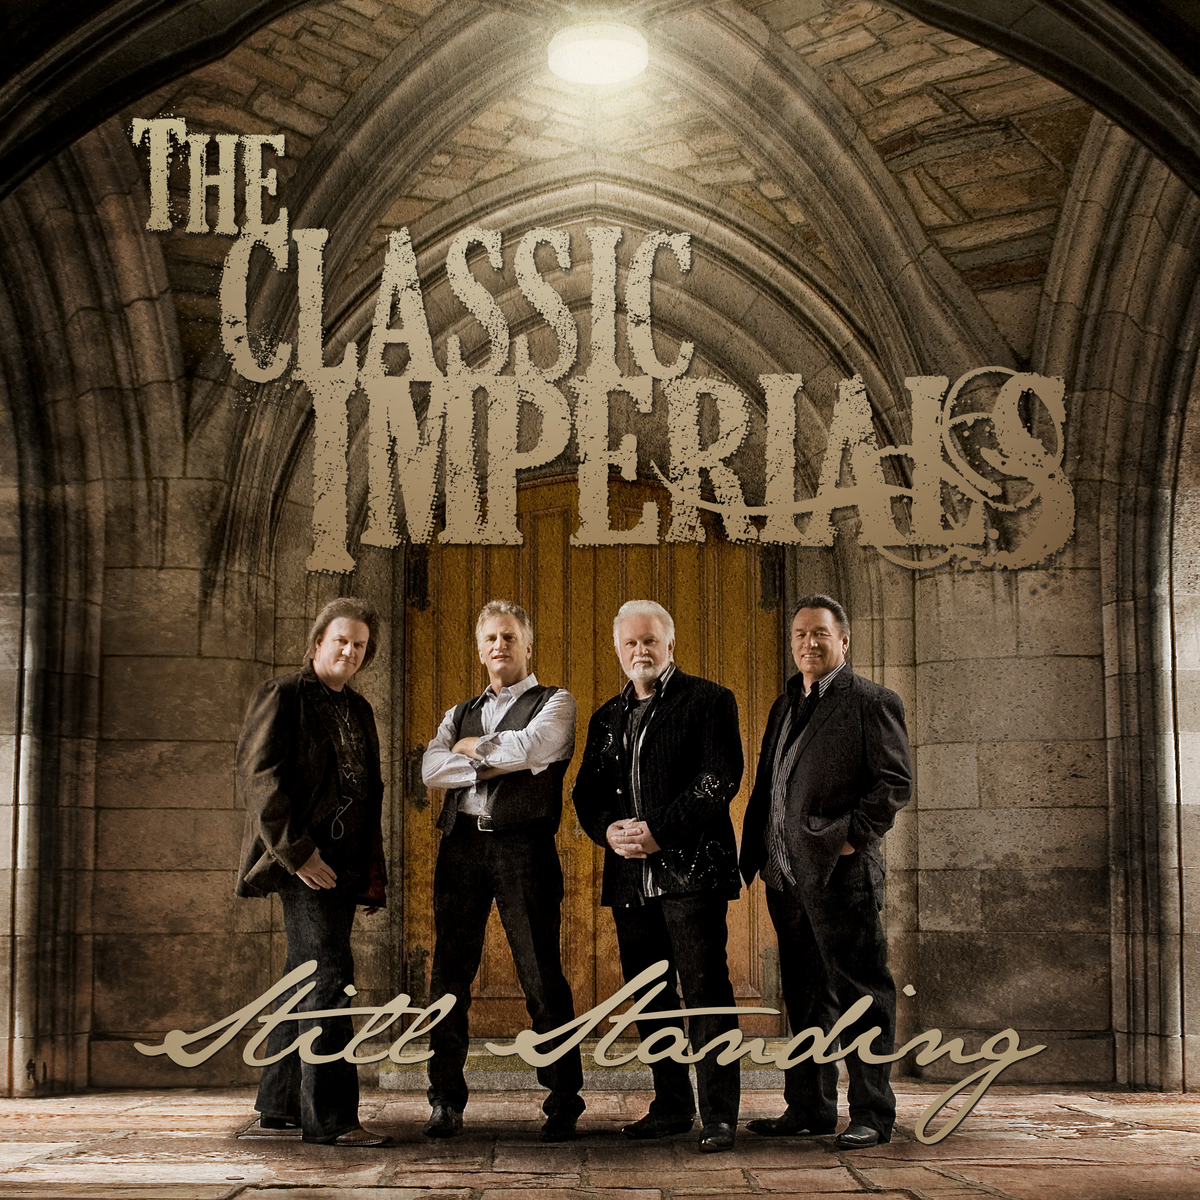 The Blues Imperials